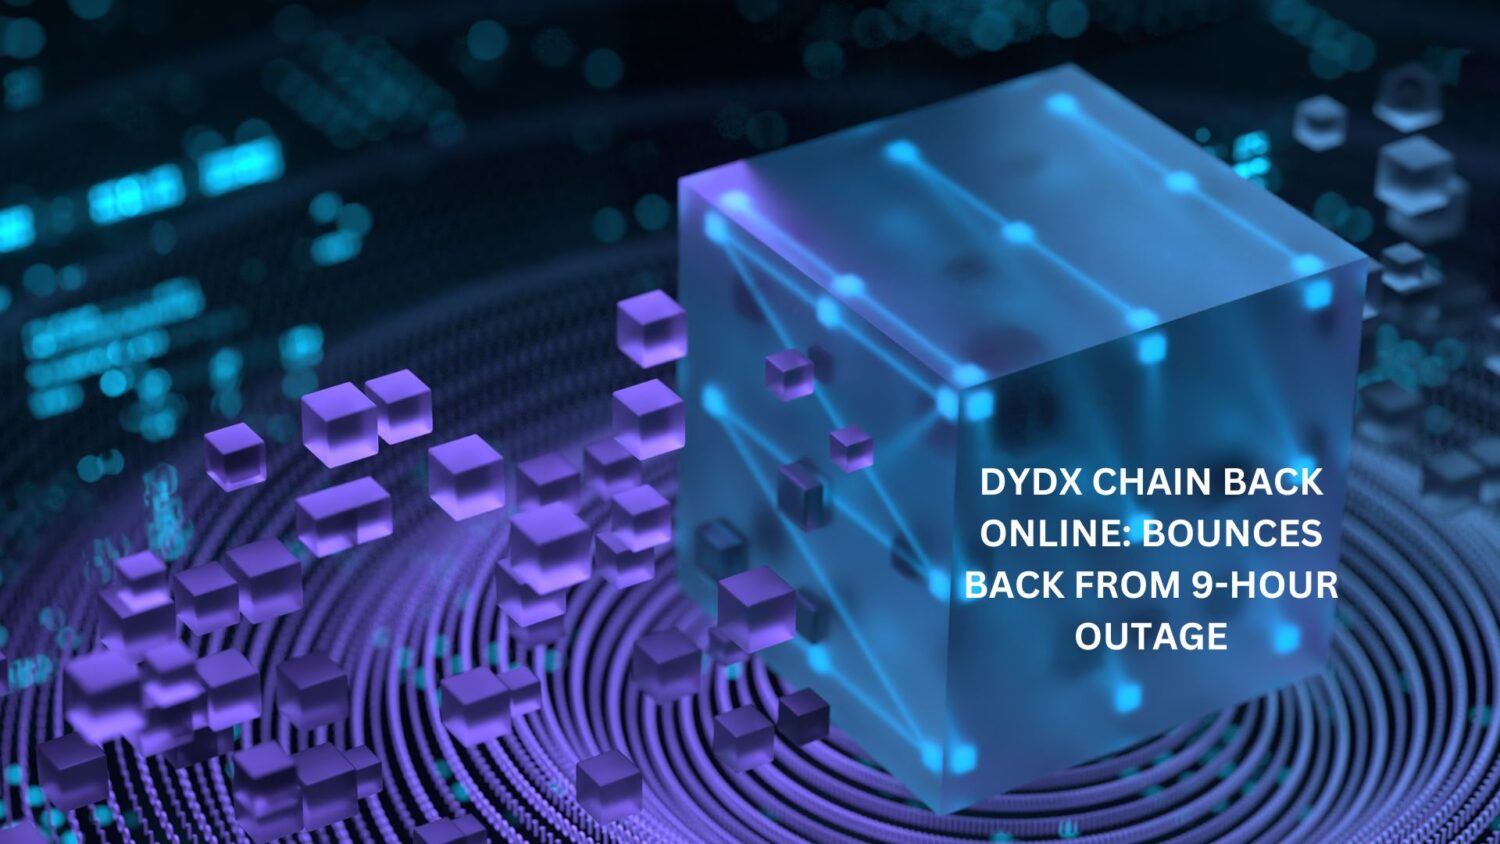 Dydx Chain Back Online: Bounces Back From 9-Hour Outage